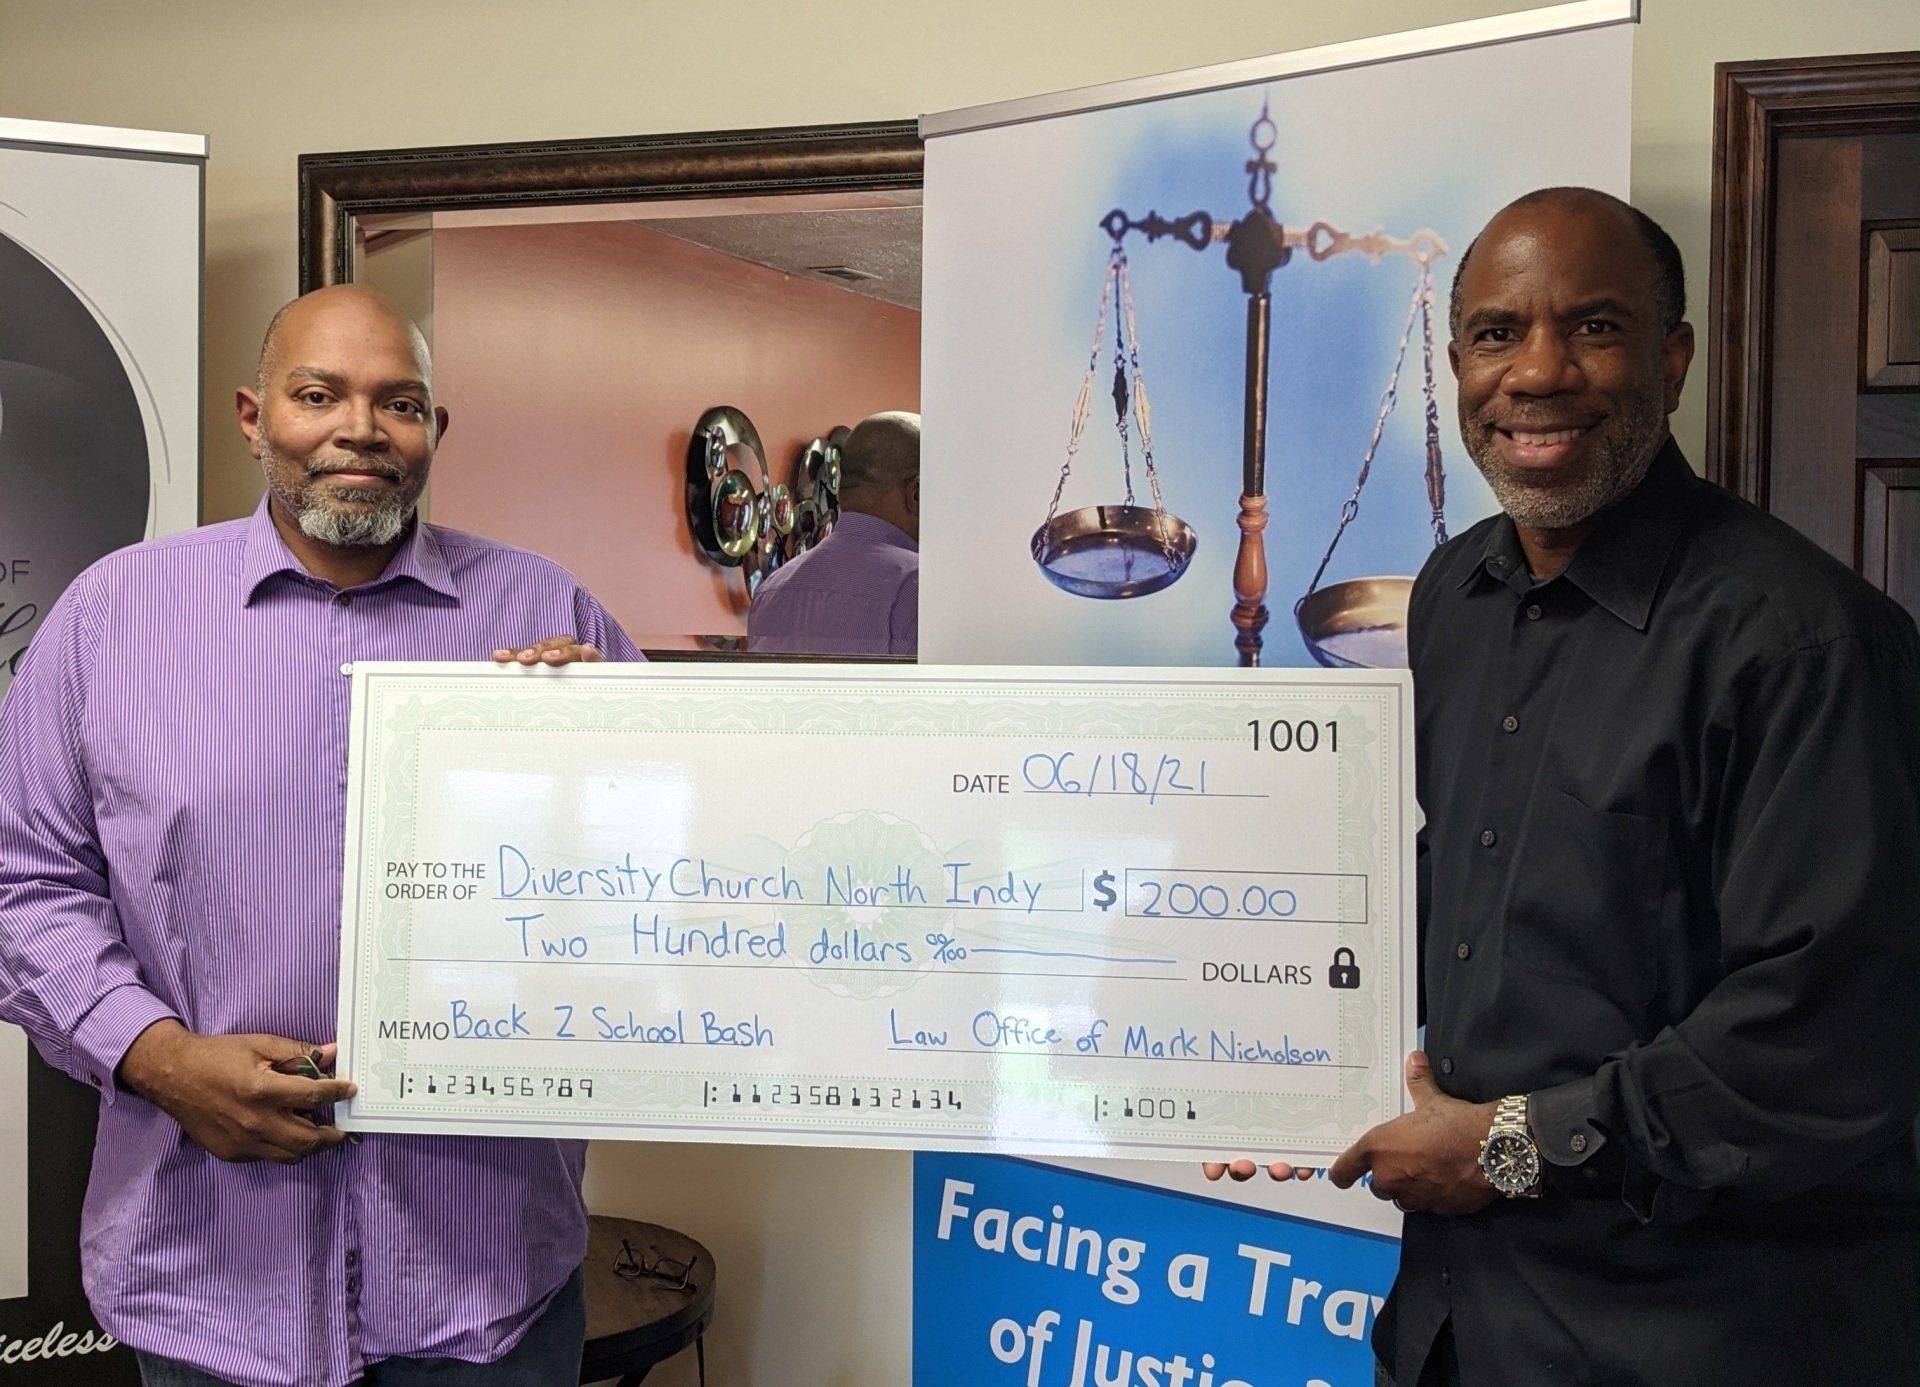 Diversity Church receives a check from Attorney Nicholson